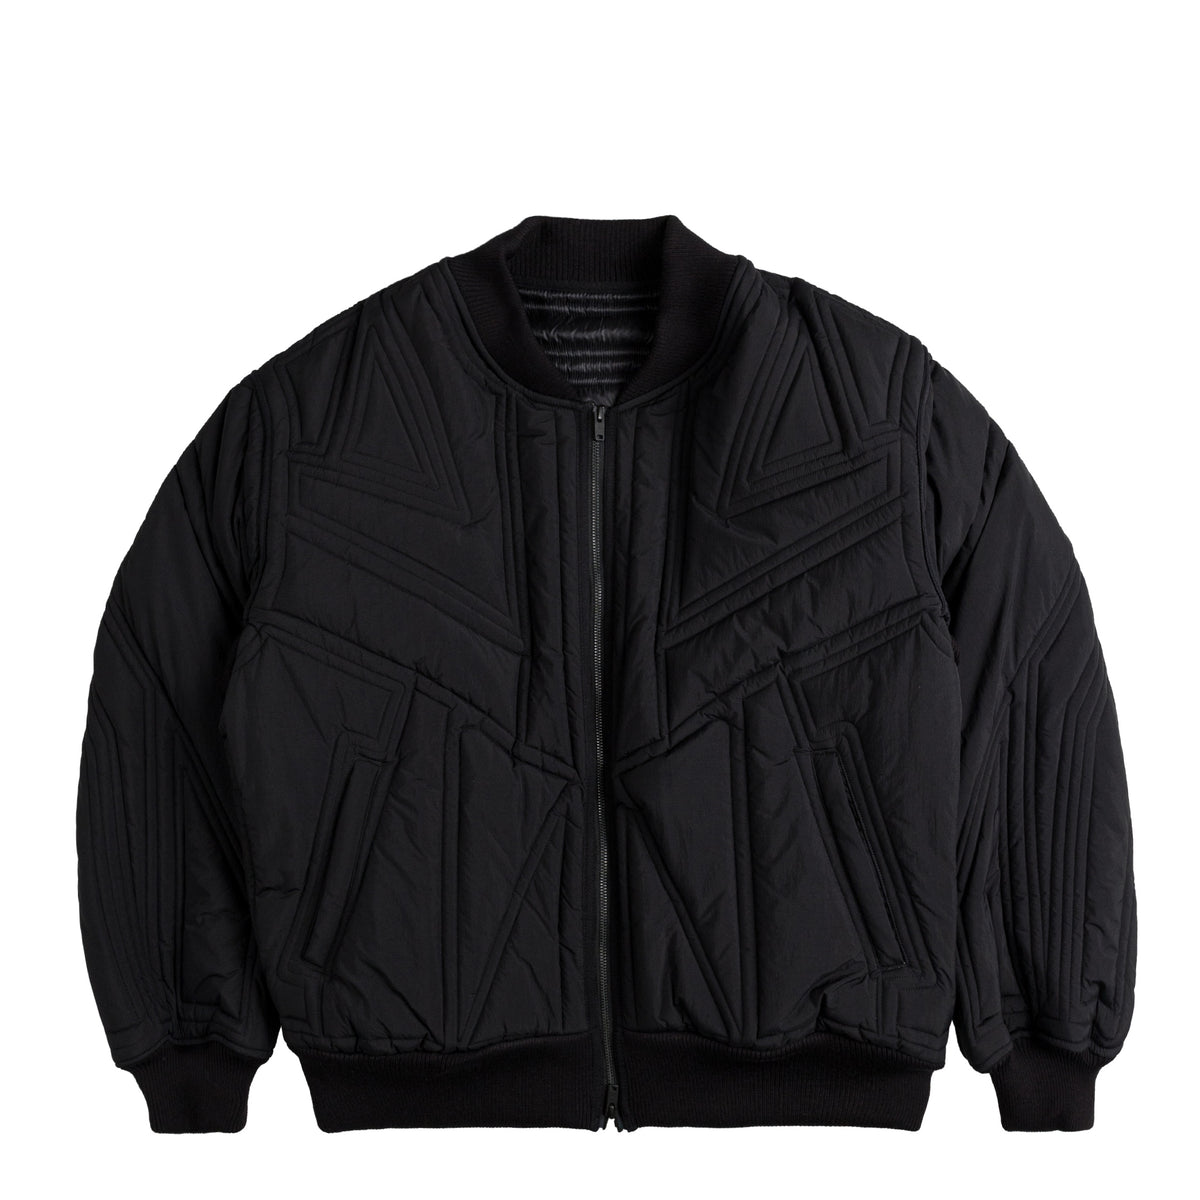 Adidas Y-3 Quilted Bomberjacket » Buy online now!